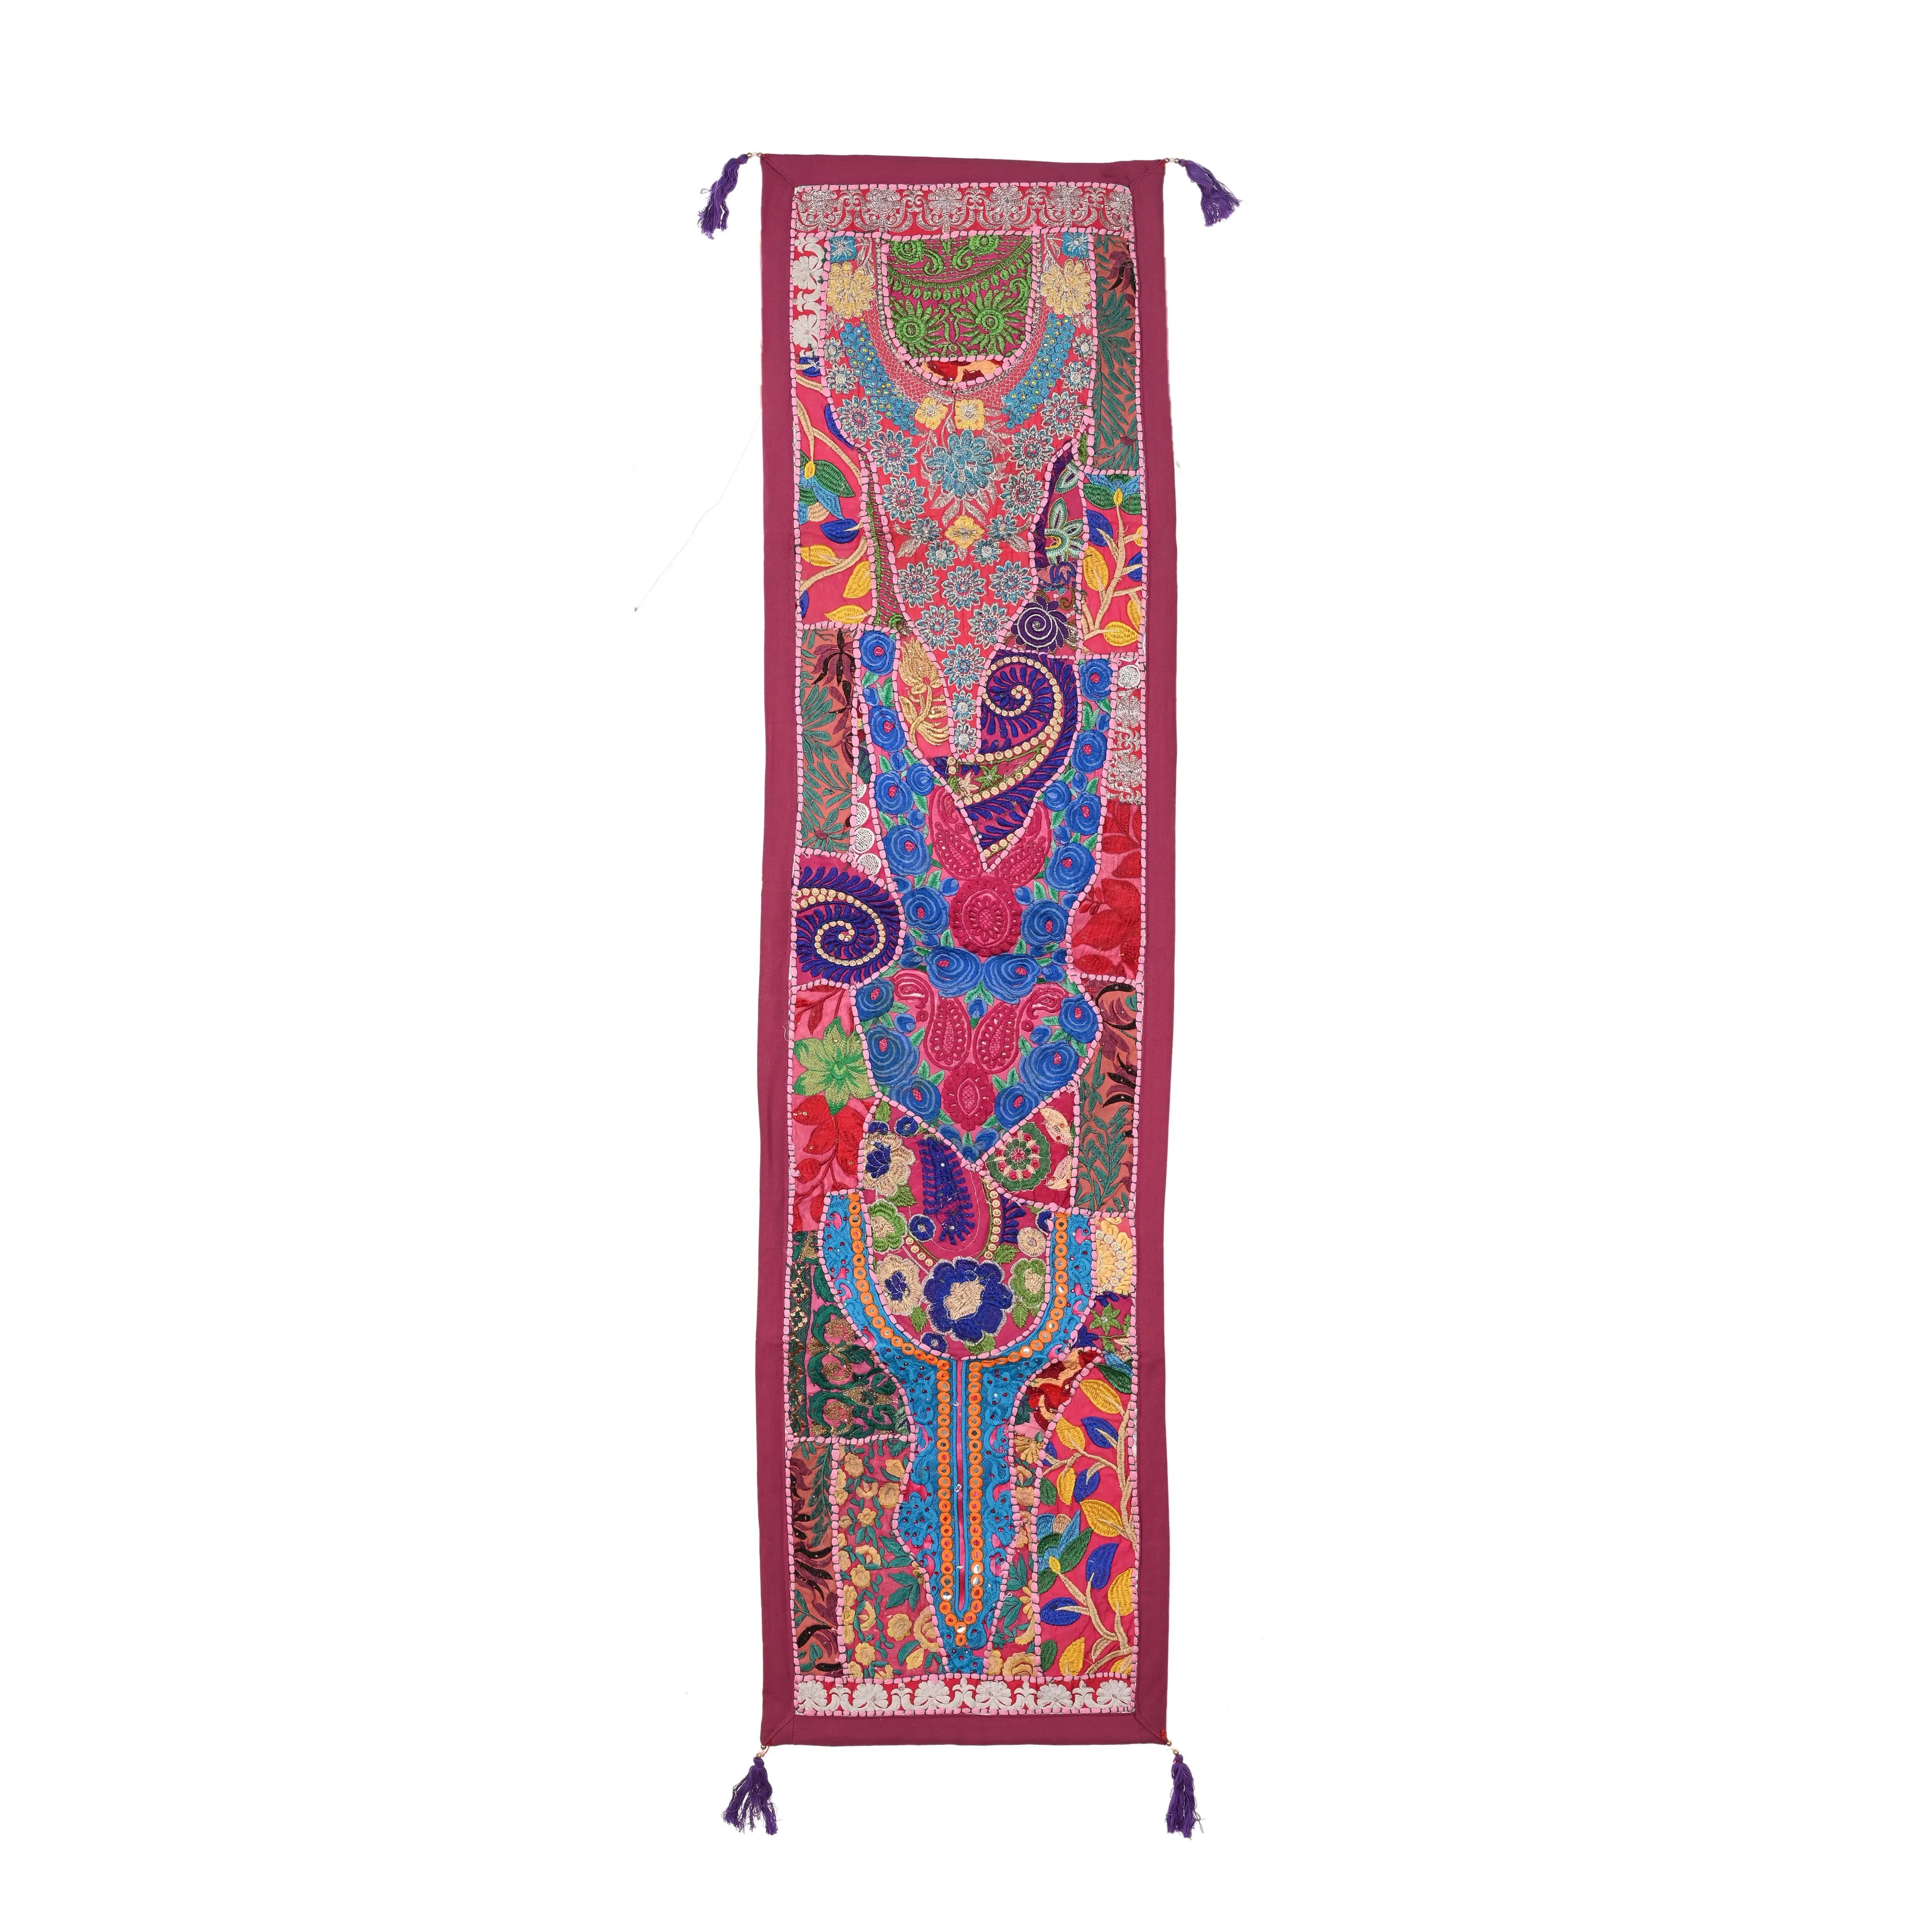 Classic Sari Beaded Patchwork Indian Style Table Runner Vintage Hand Embroidery Table Runner For Dining Room Decoration